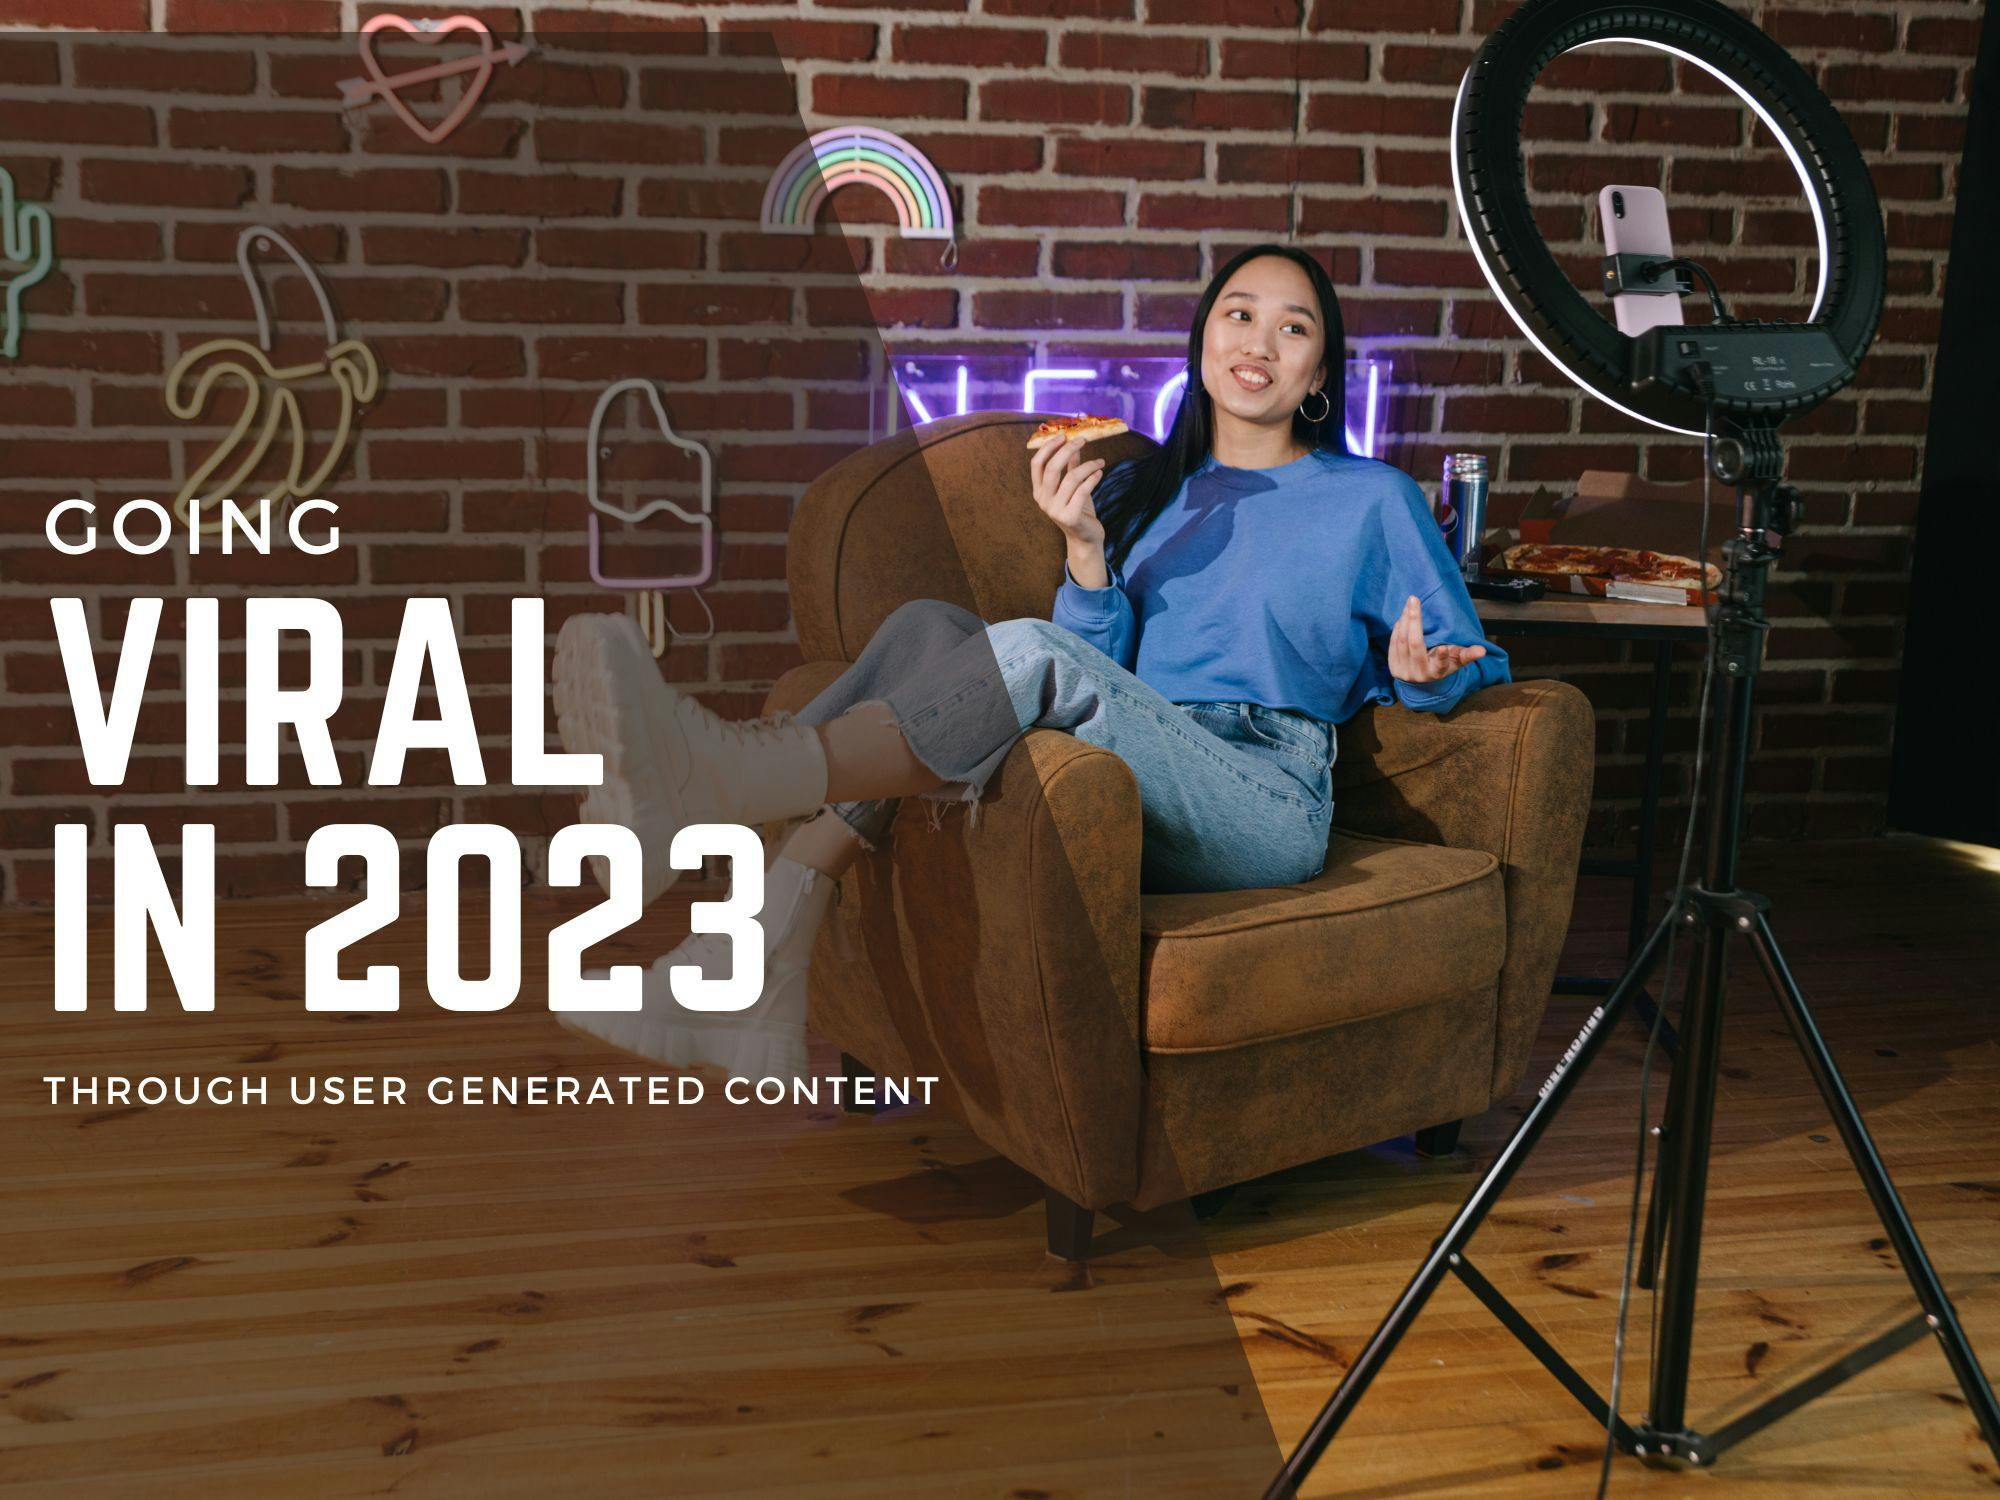 Going viral in 2023 through user generated content